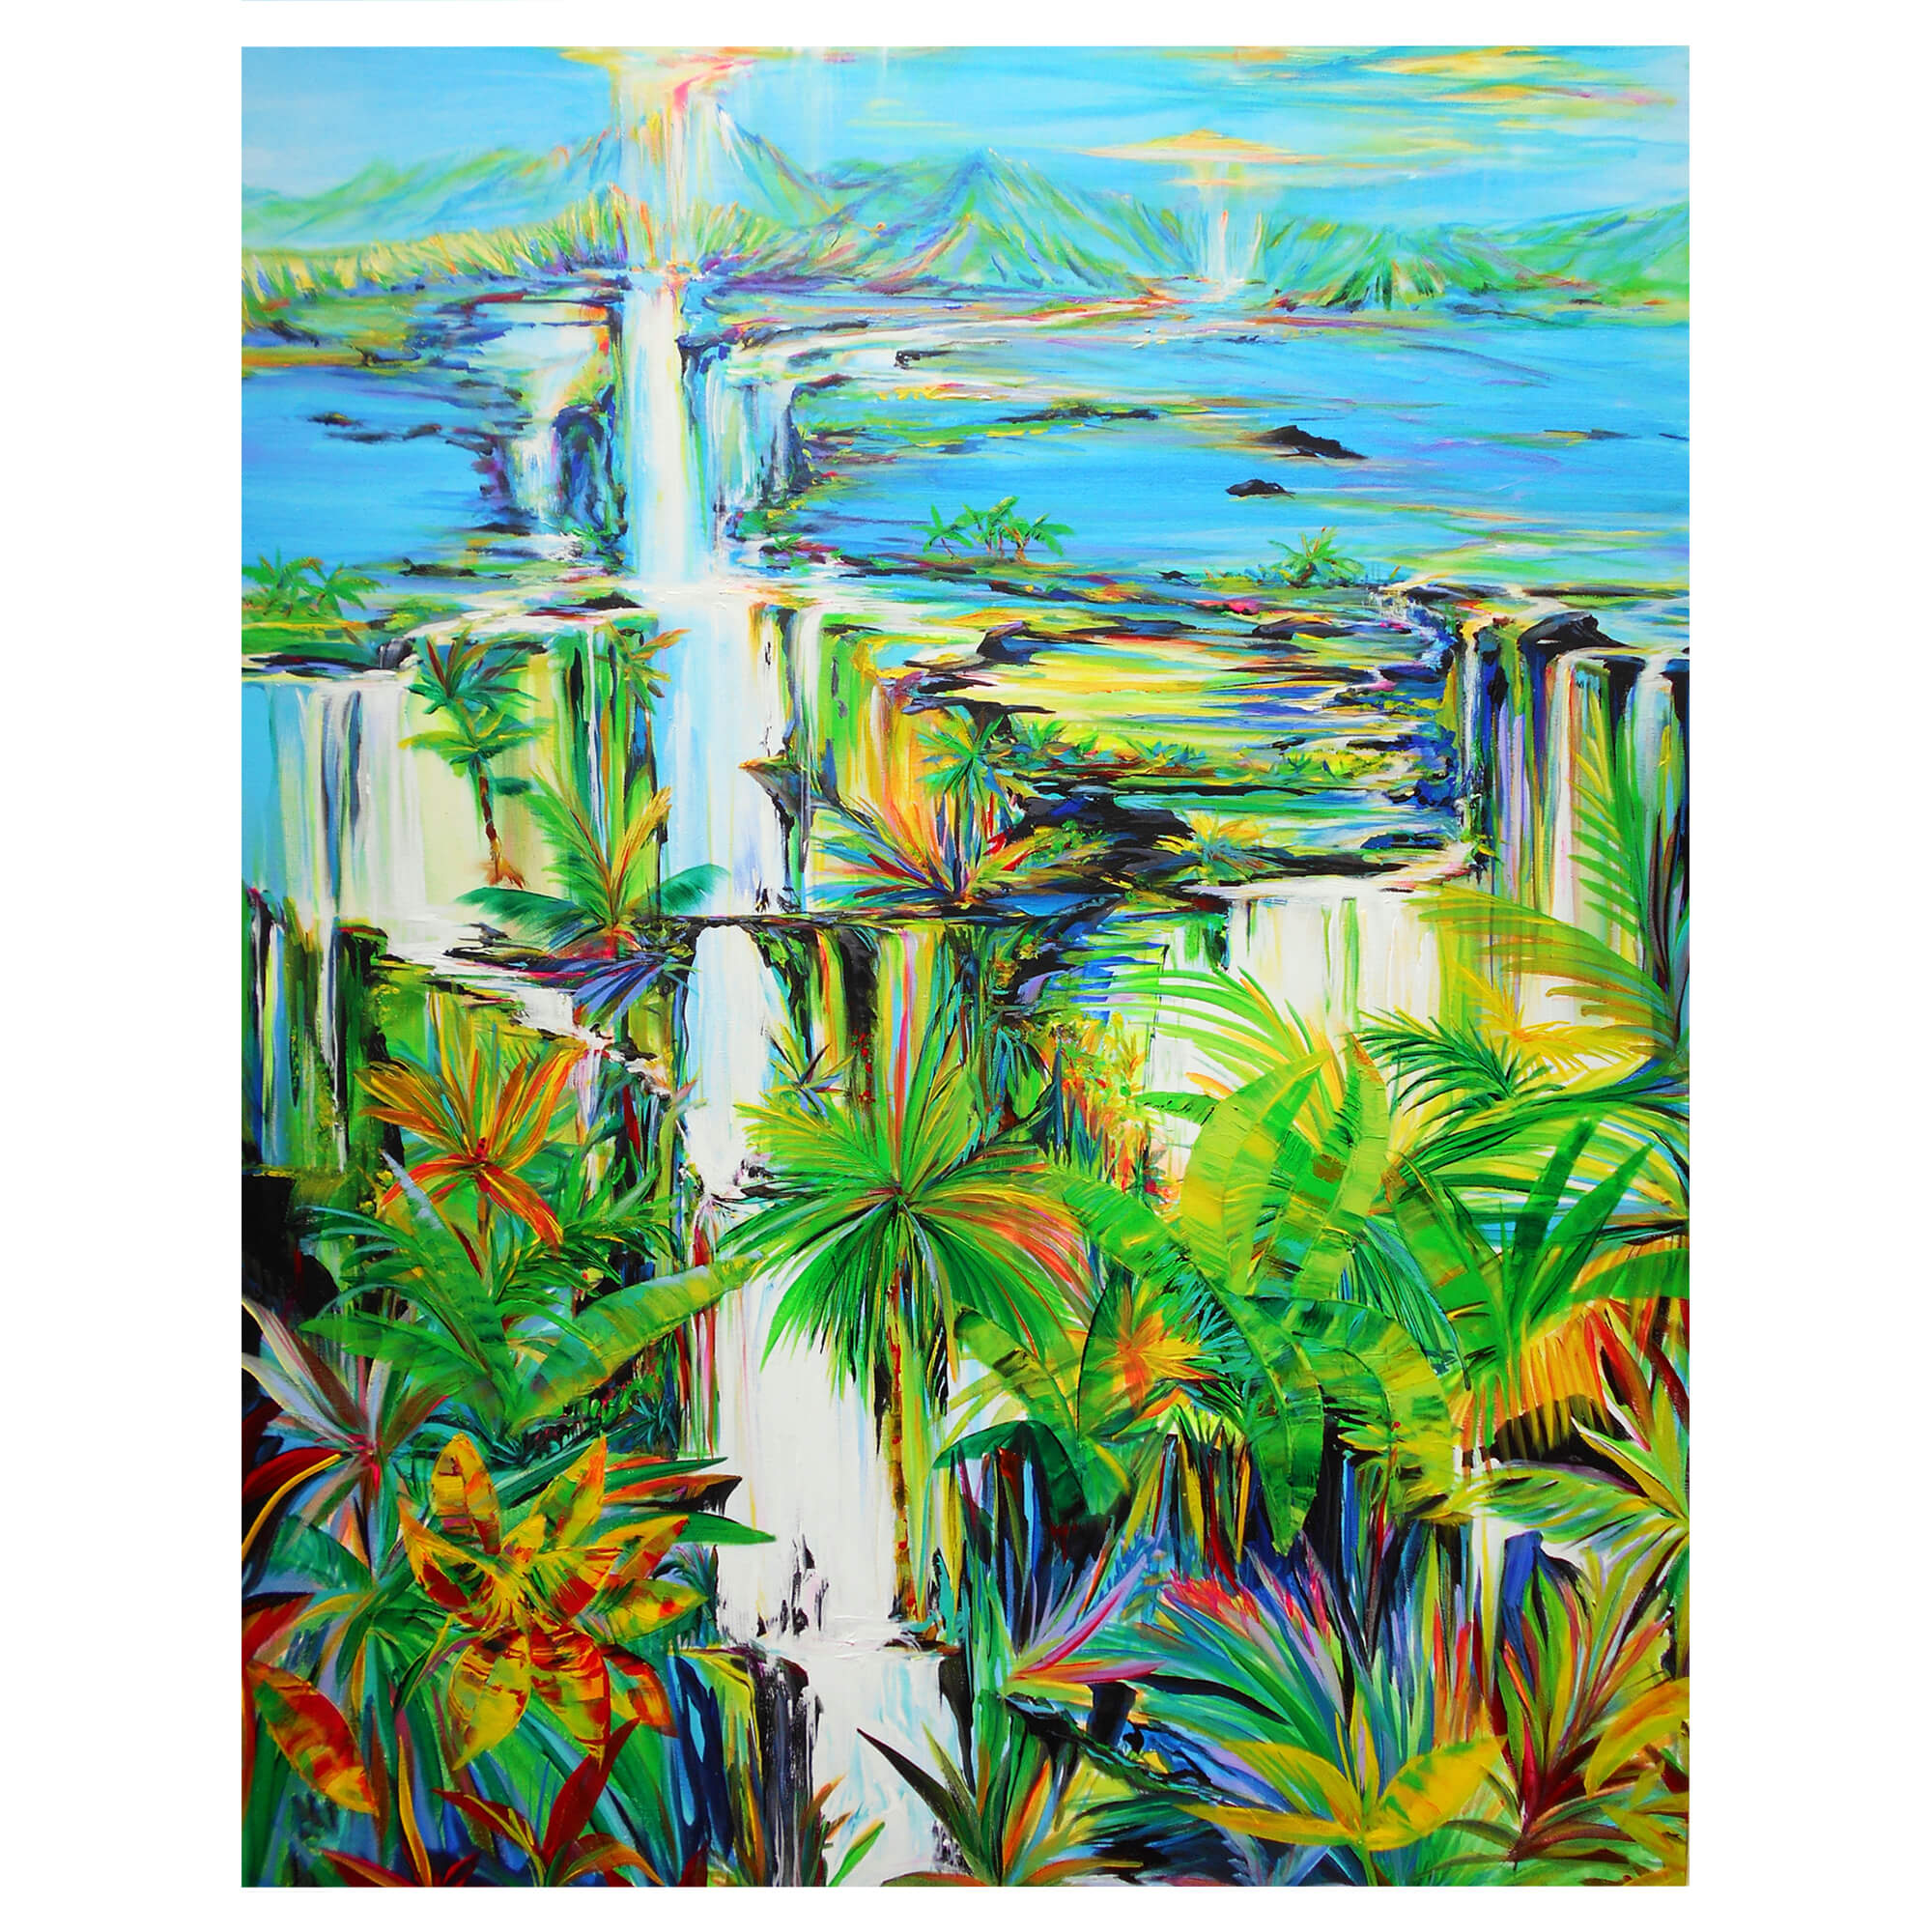 Colorful tropical plants surrounding a mountain with a waterfall by Hawaii artist Jess Burda